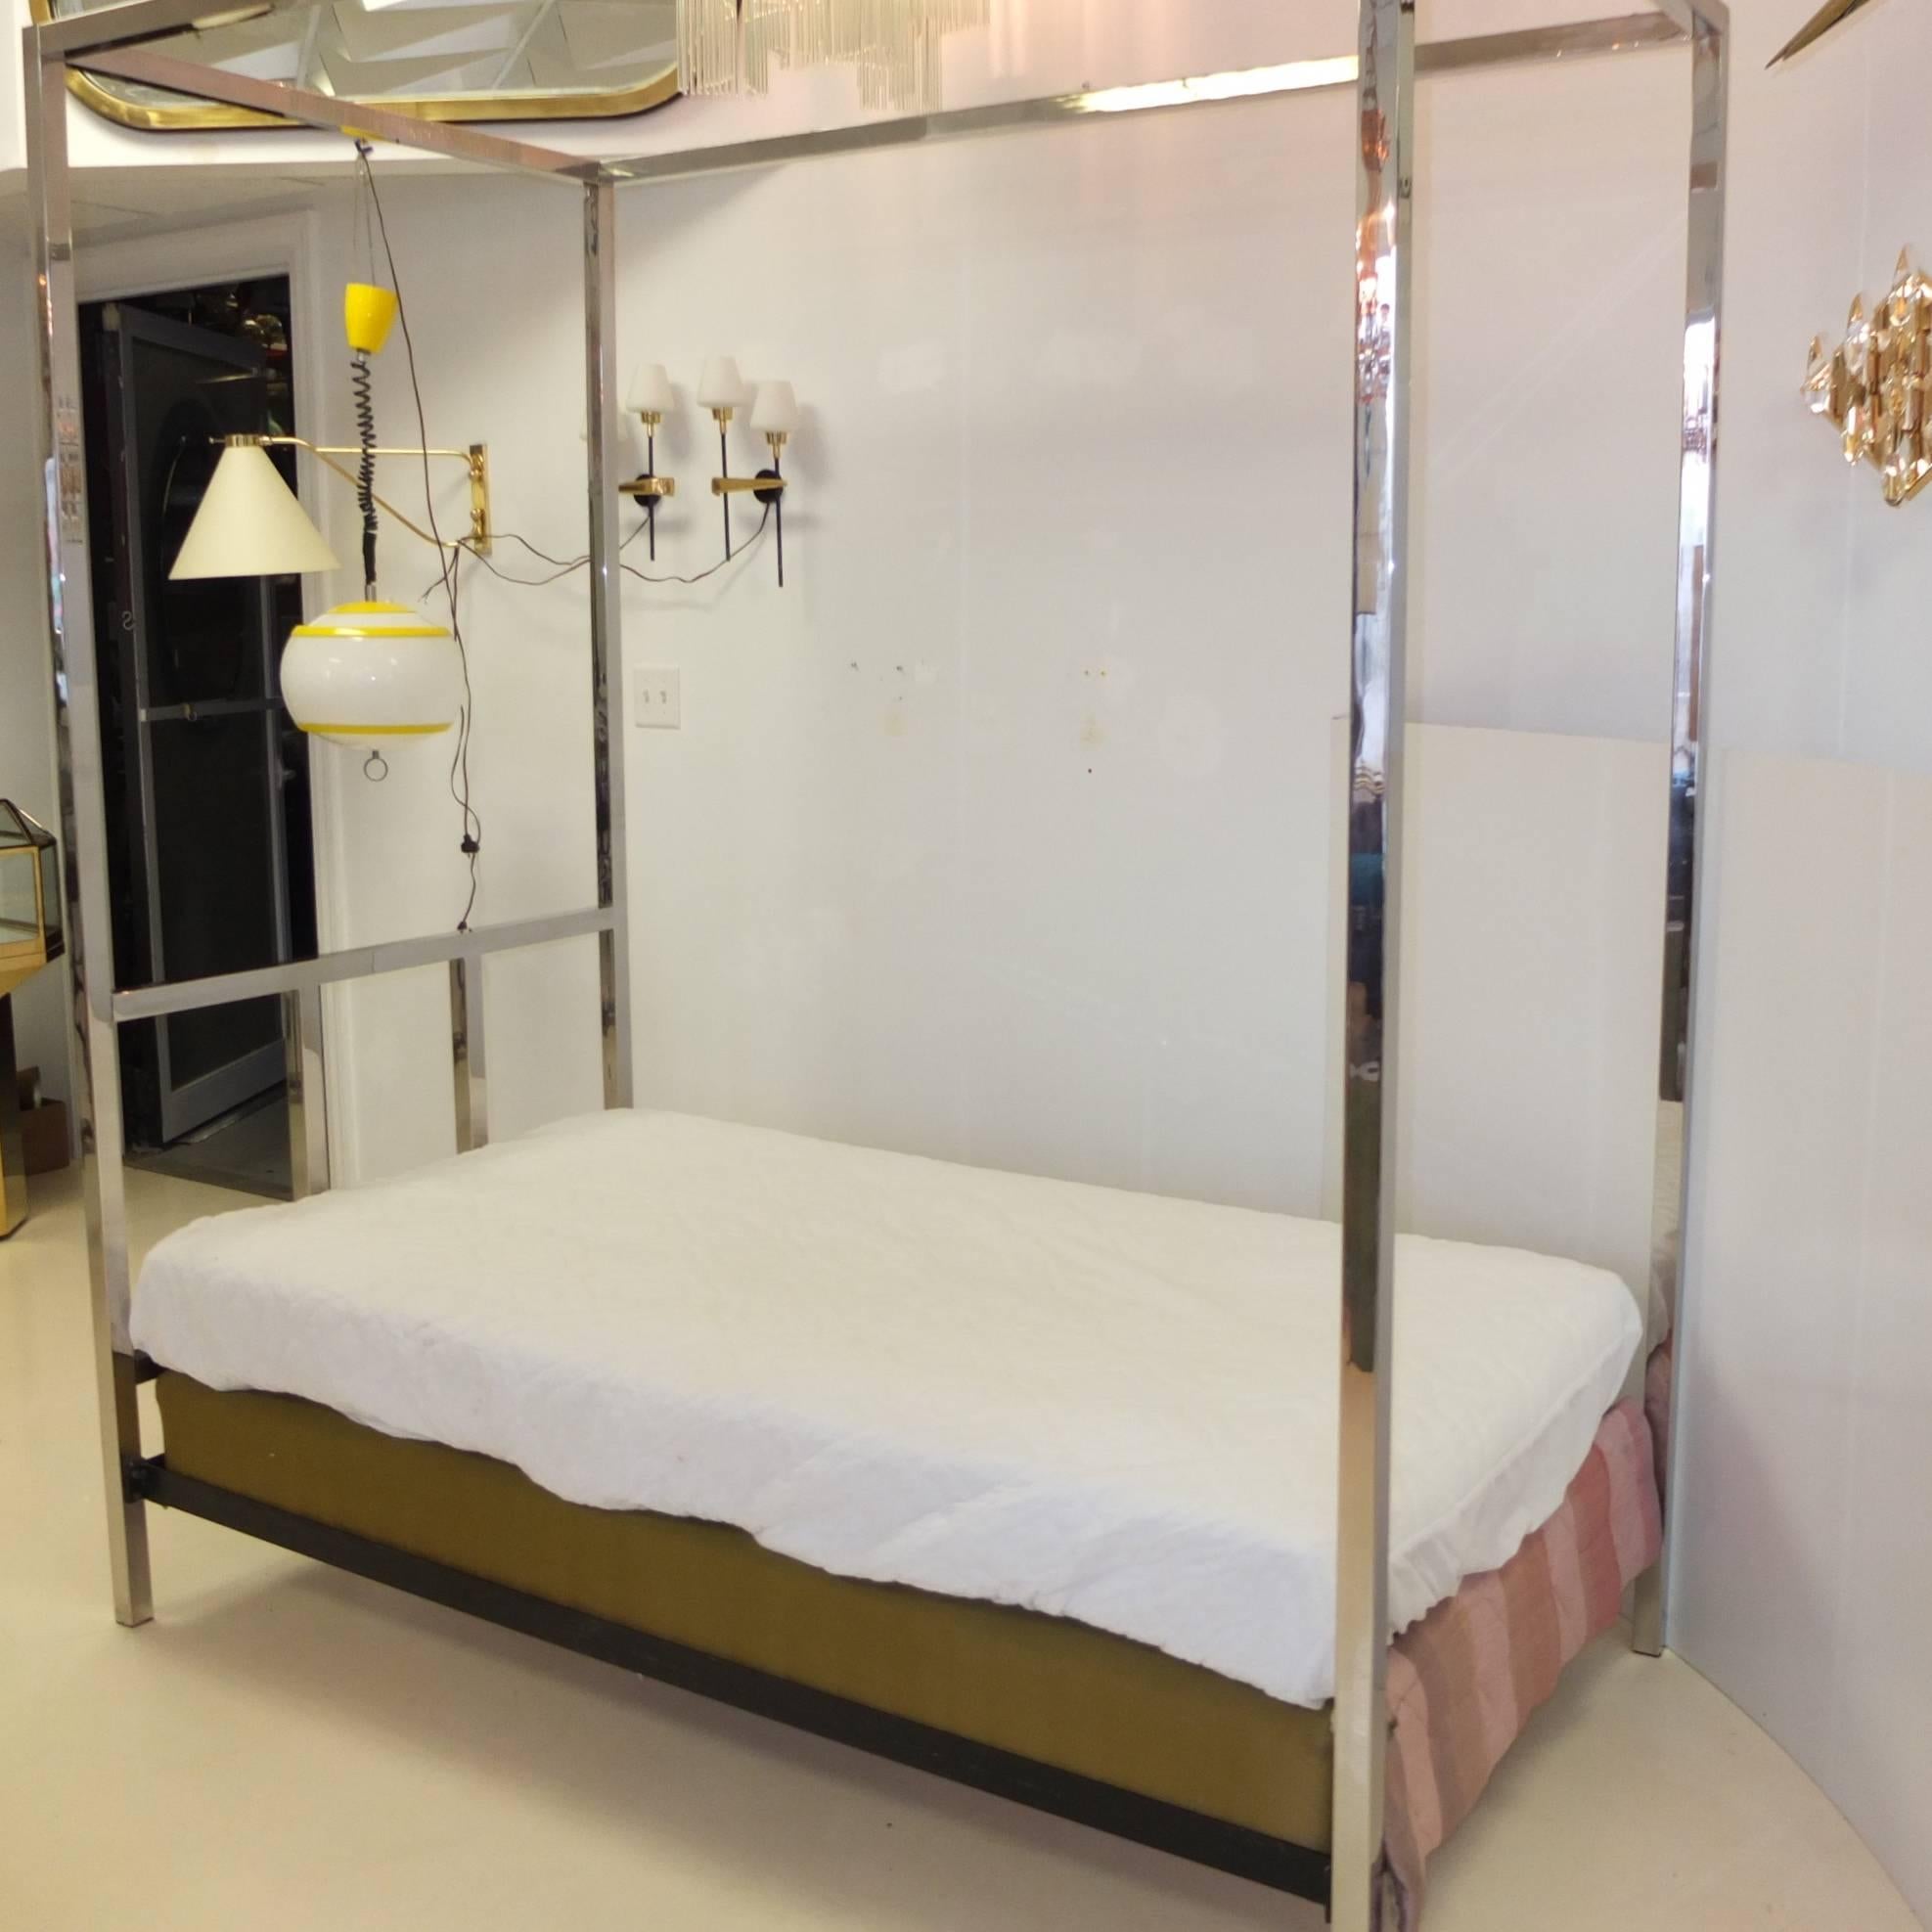 SATURDAY SALE one week only. No further discounts. 16 Sept 2019

Pace collection 9964-1 four-poster bed from 1968 in very uncommon 